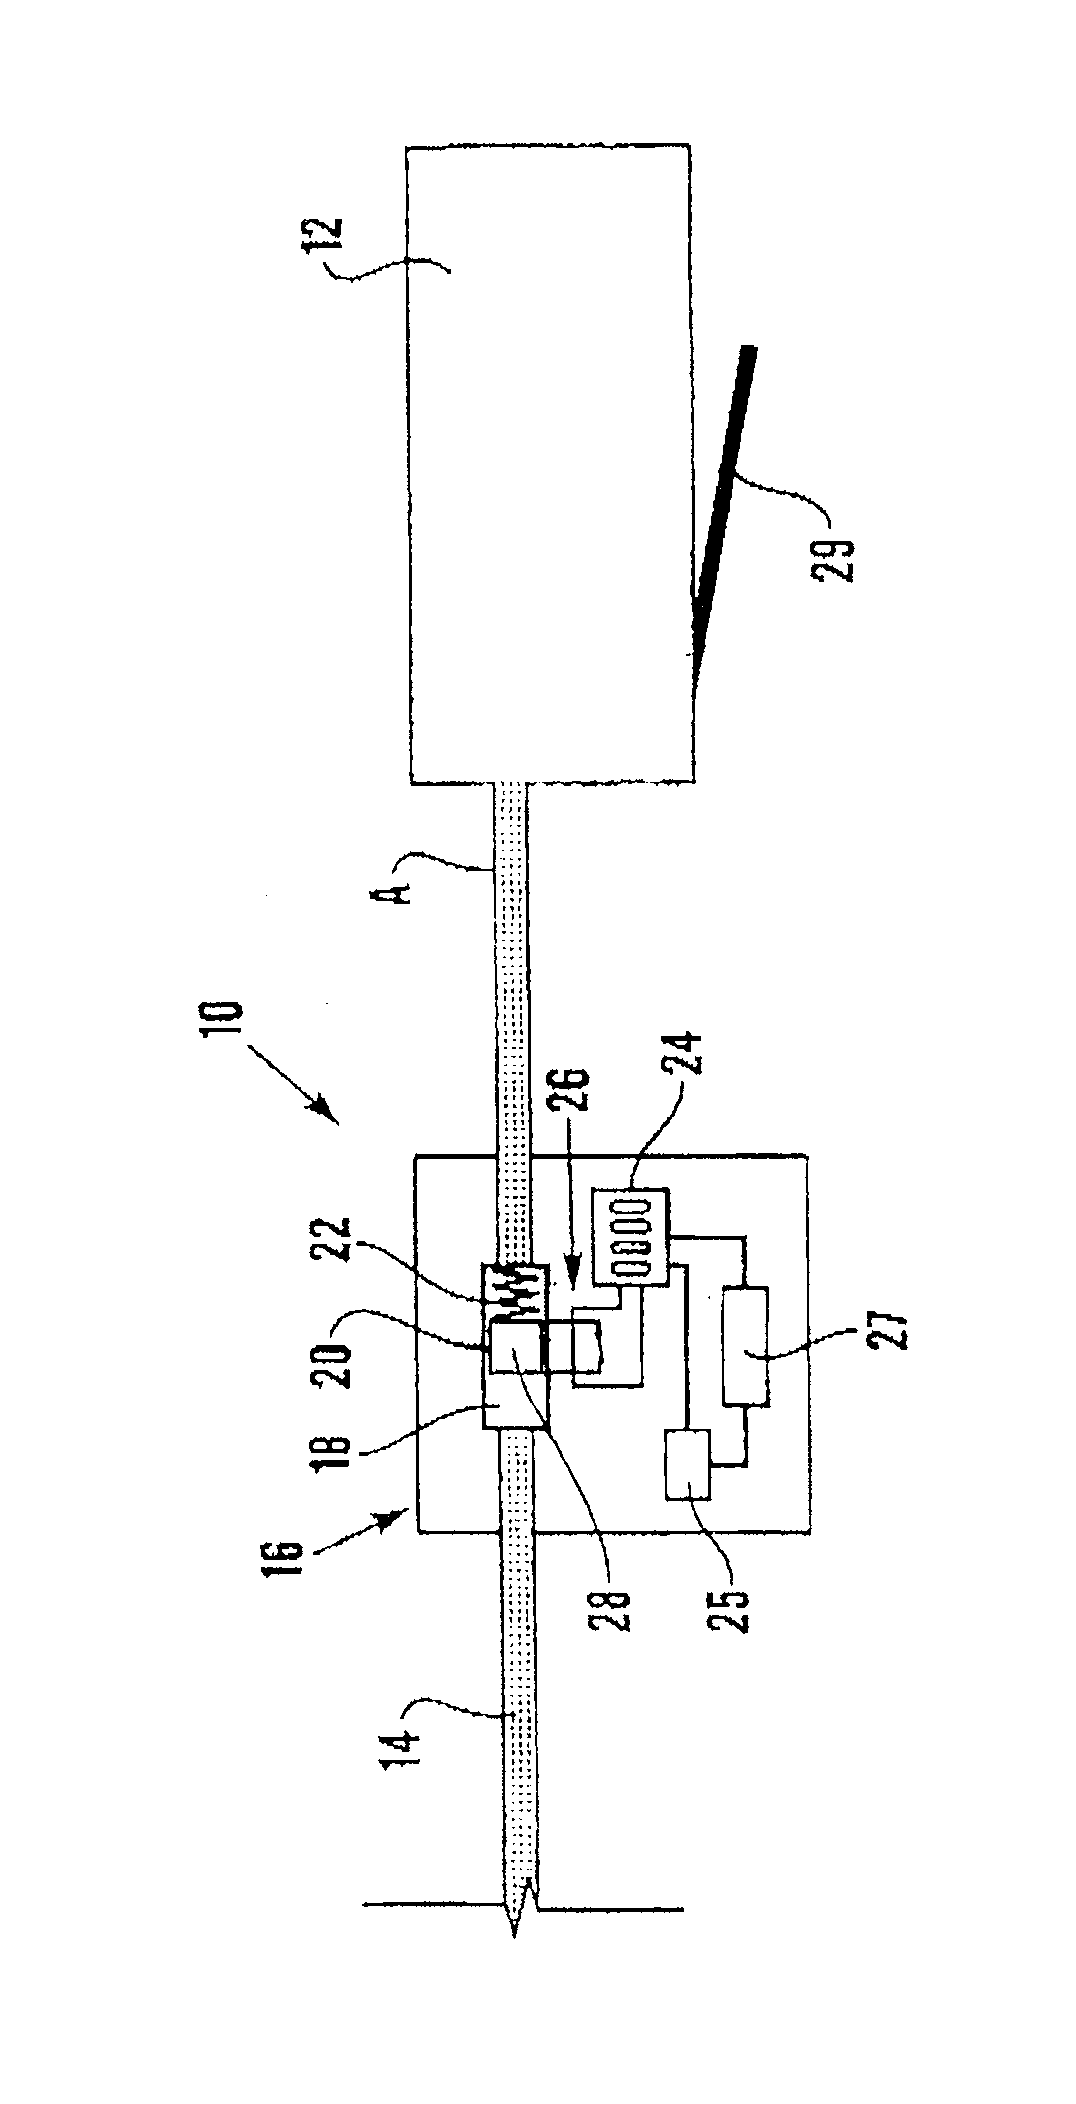 Tool monitoring device